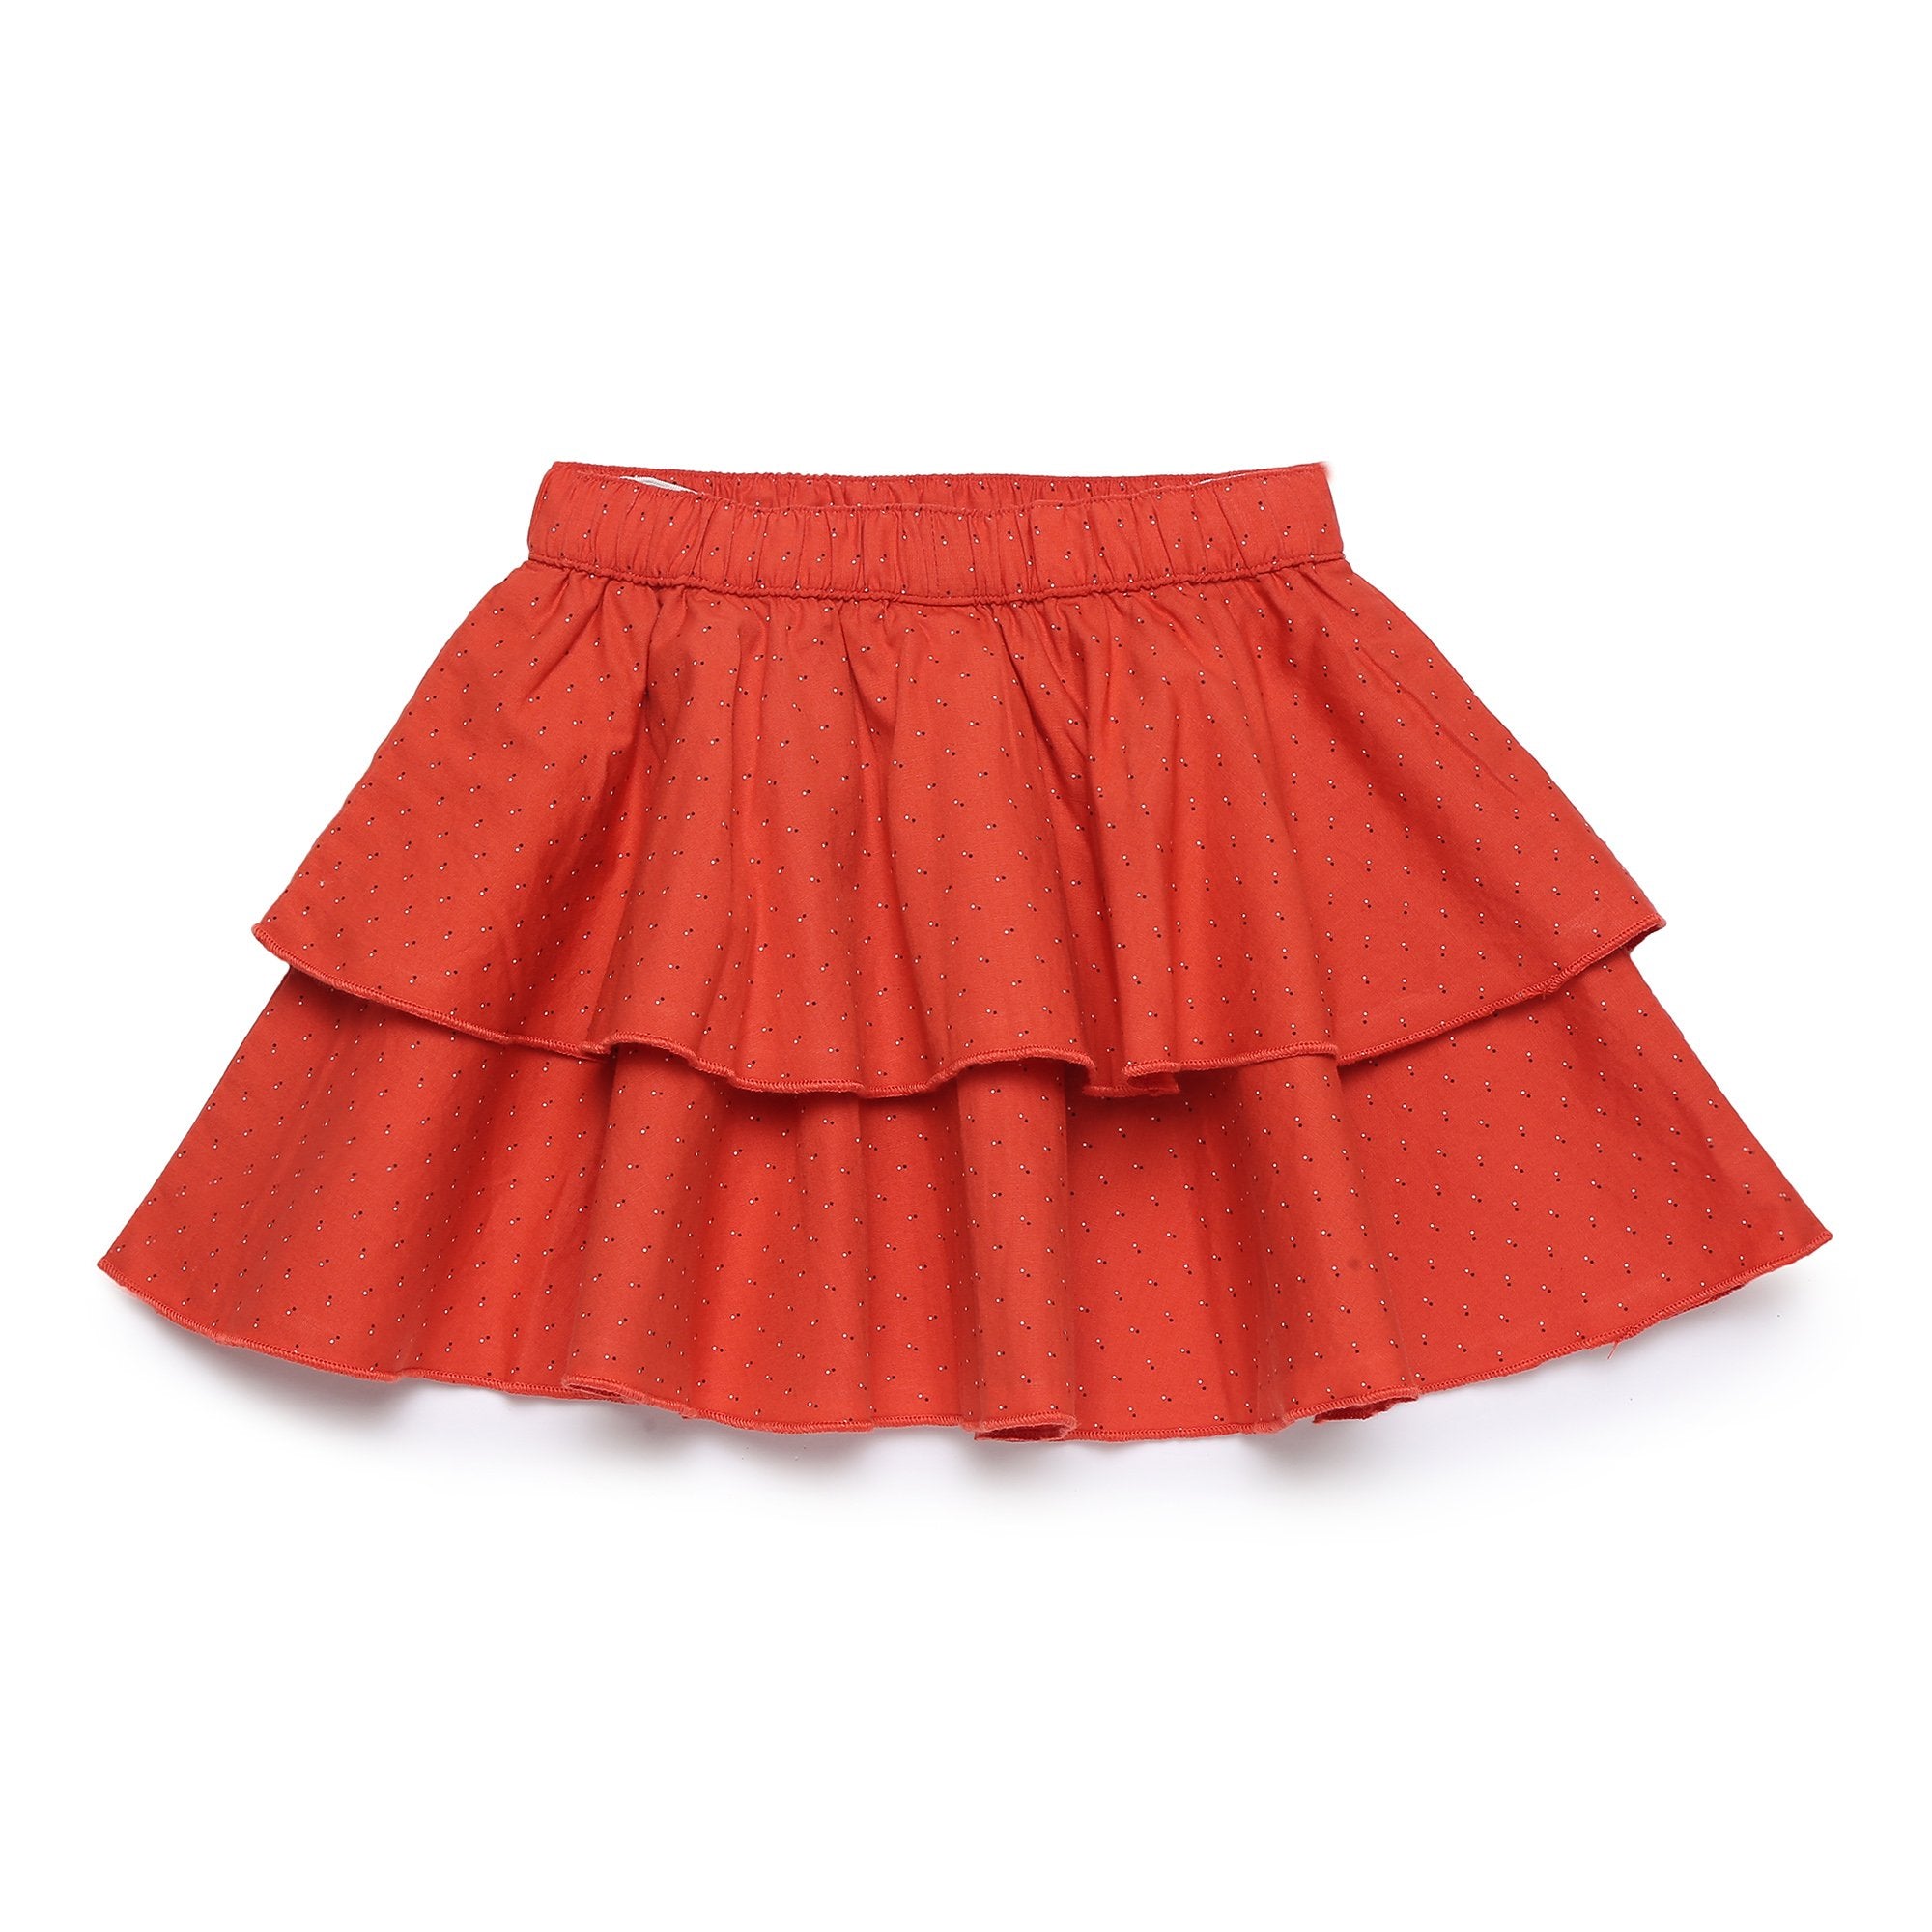 Baby Girls Polka Printed Top & Skirt Outfit